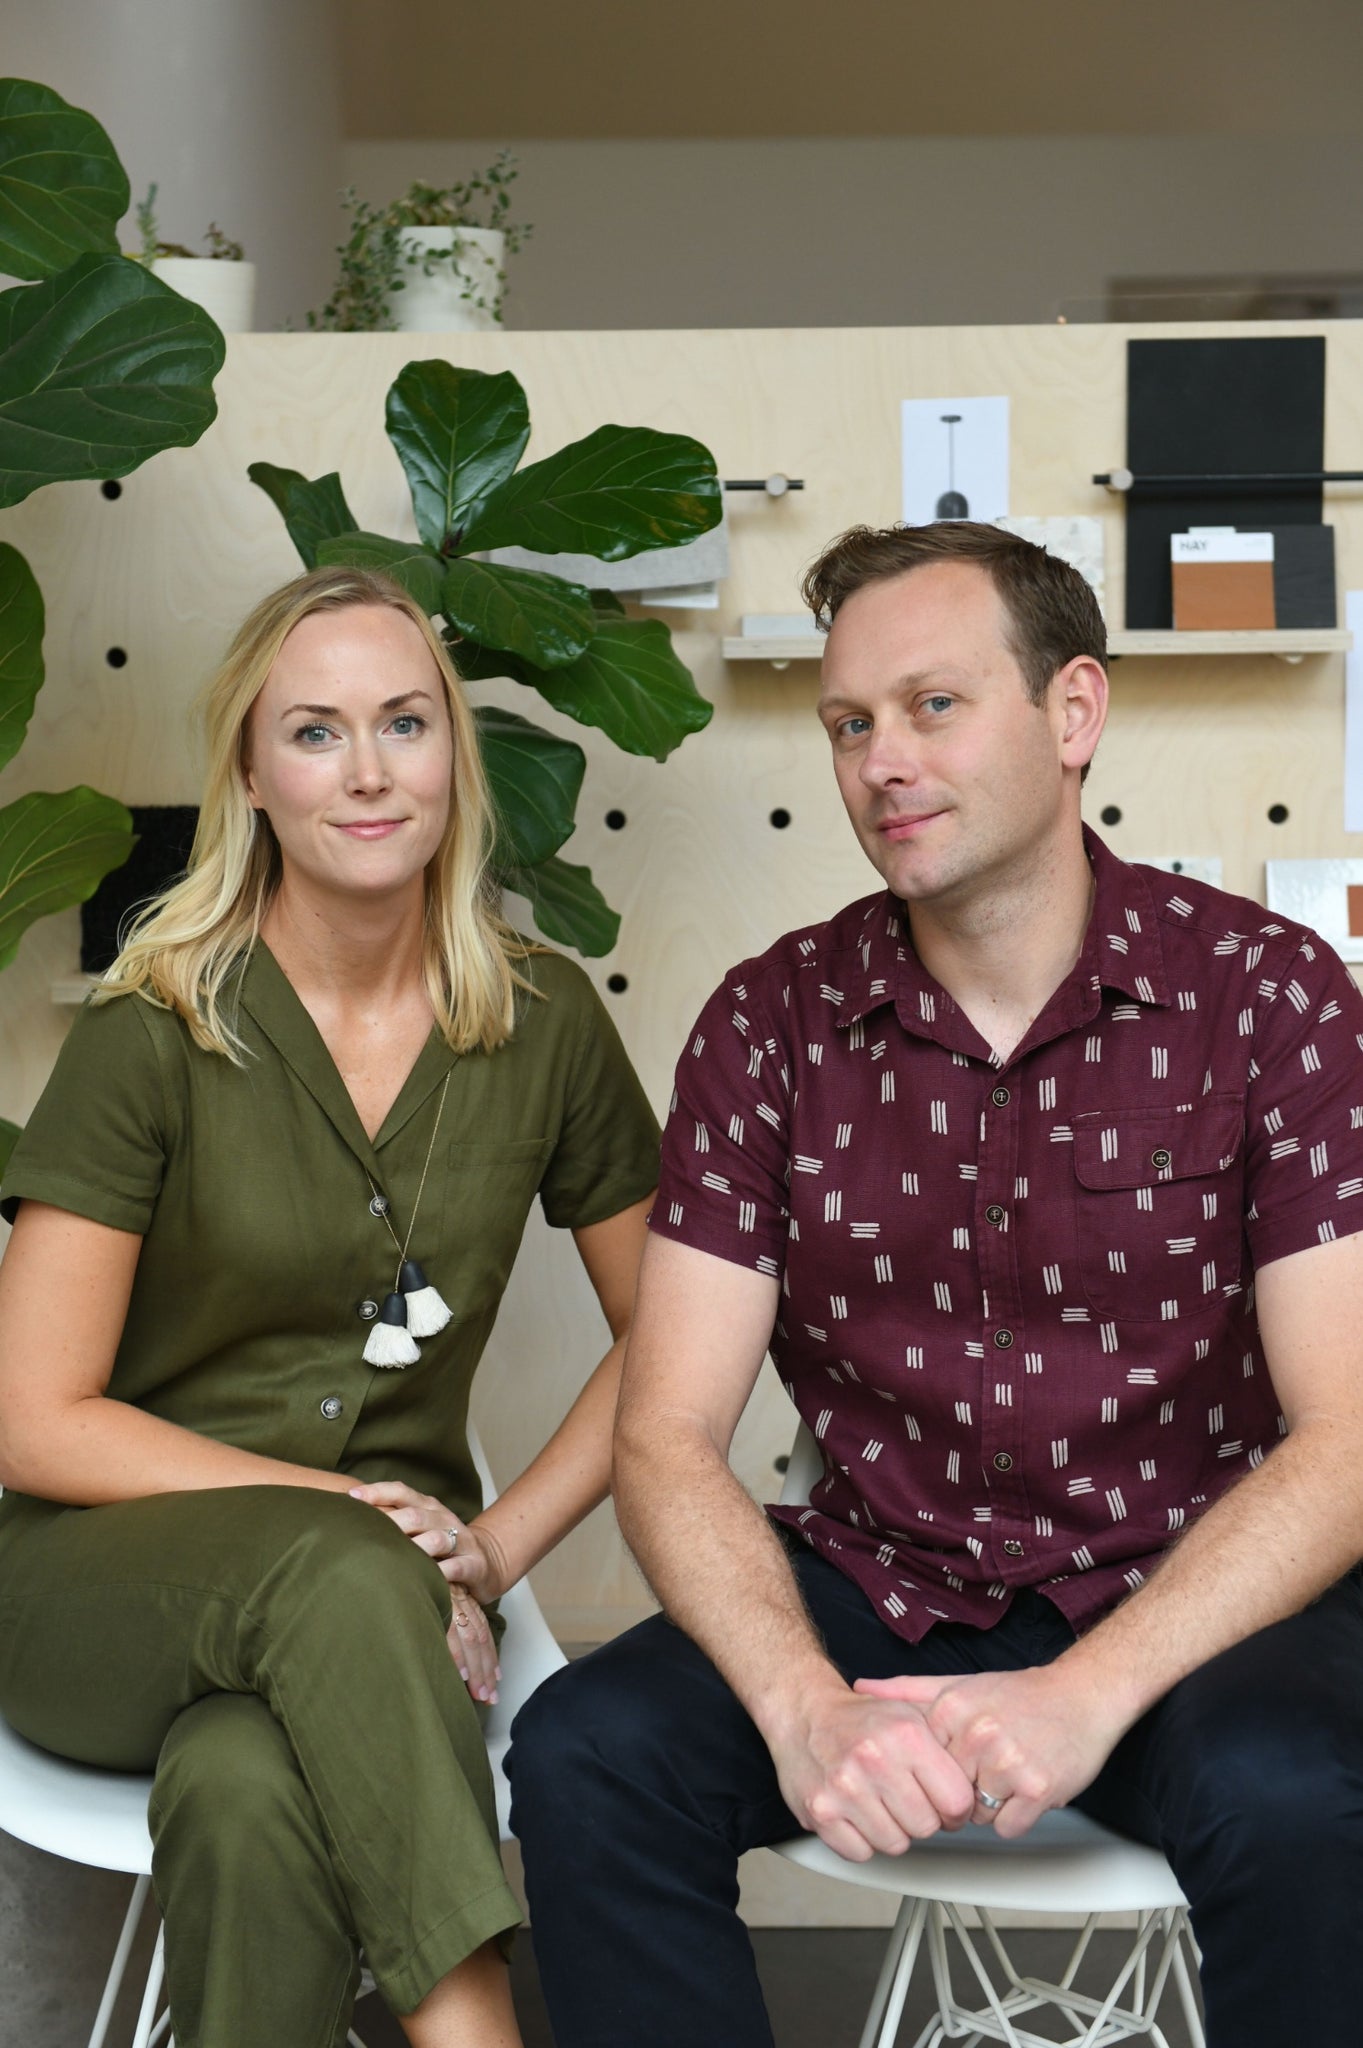 man and woman sitting on a stool in a room with plants